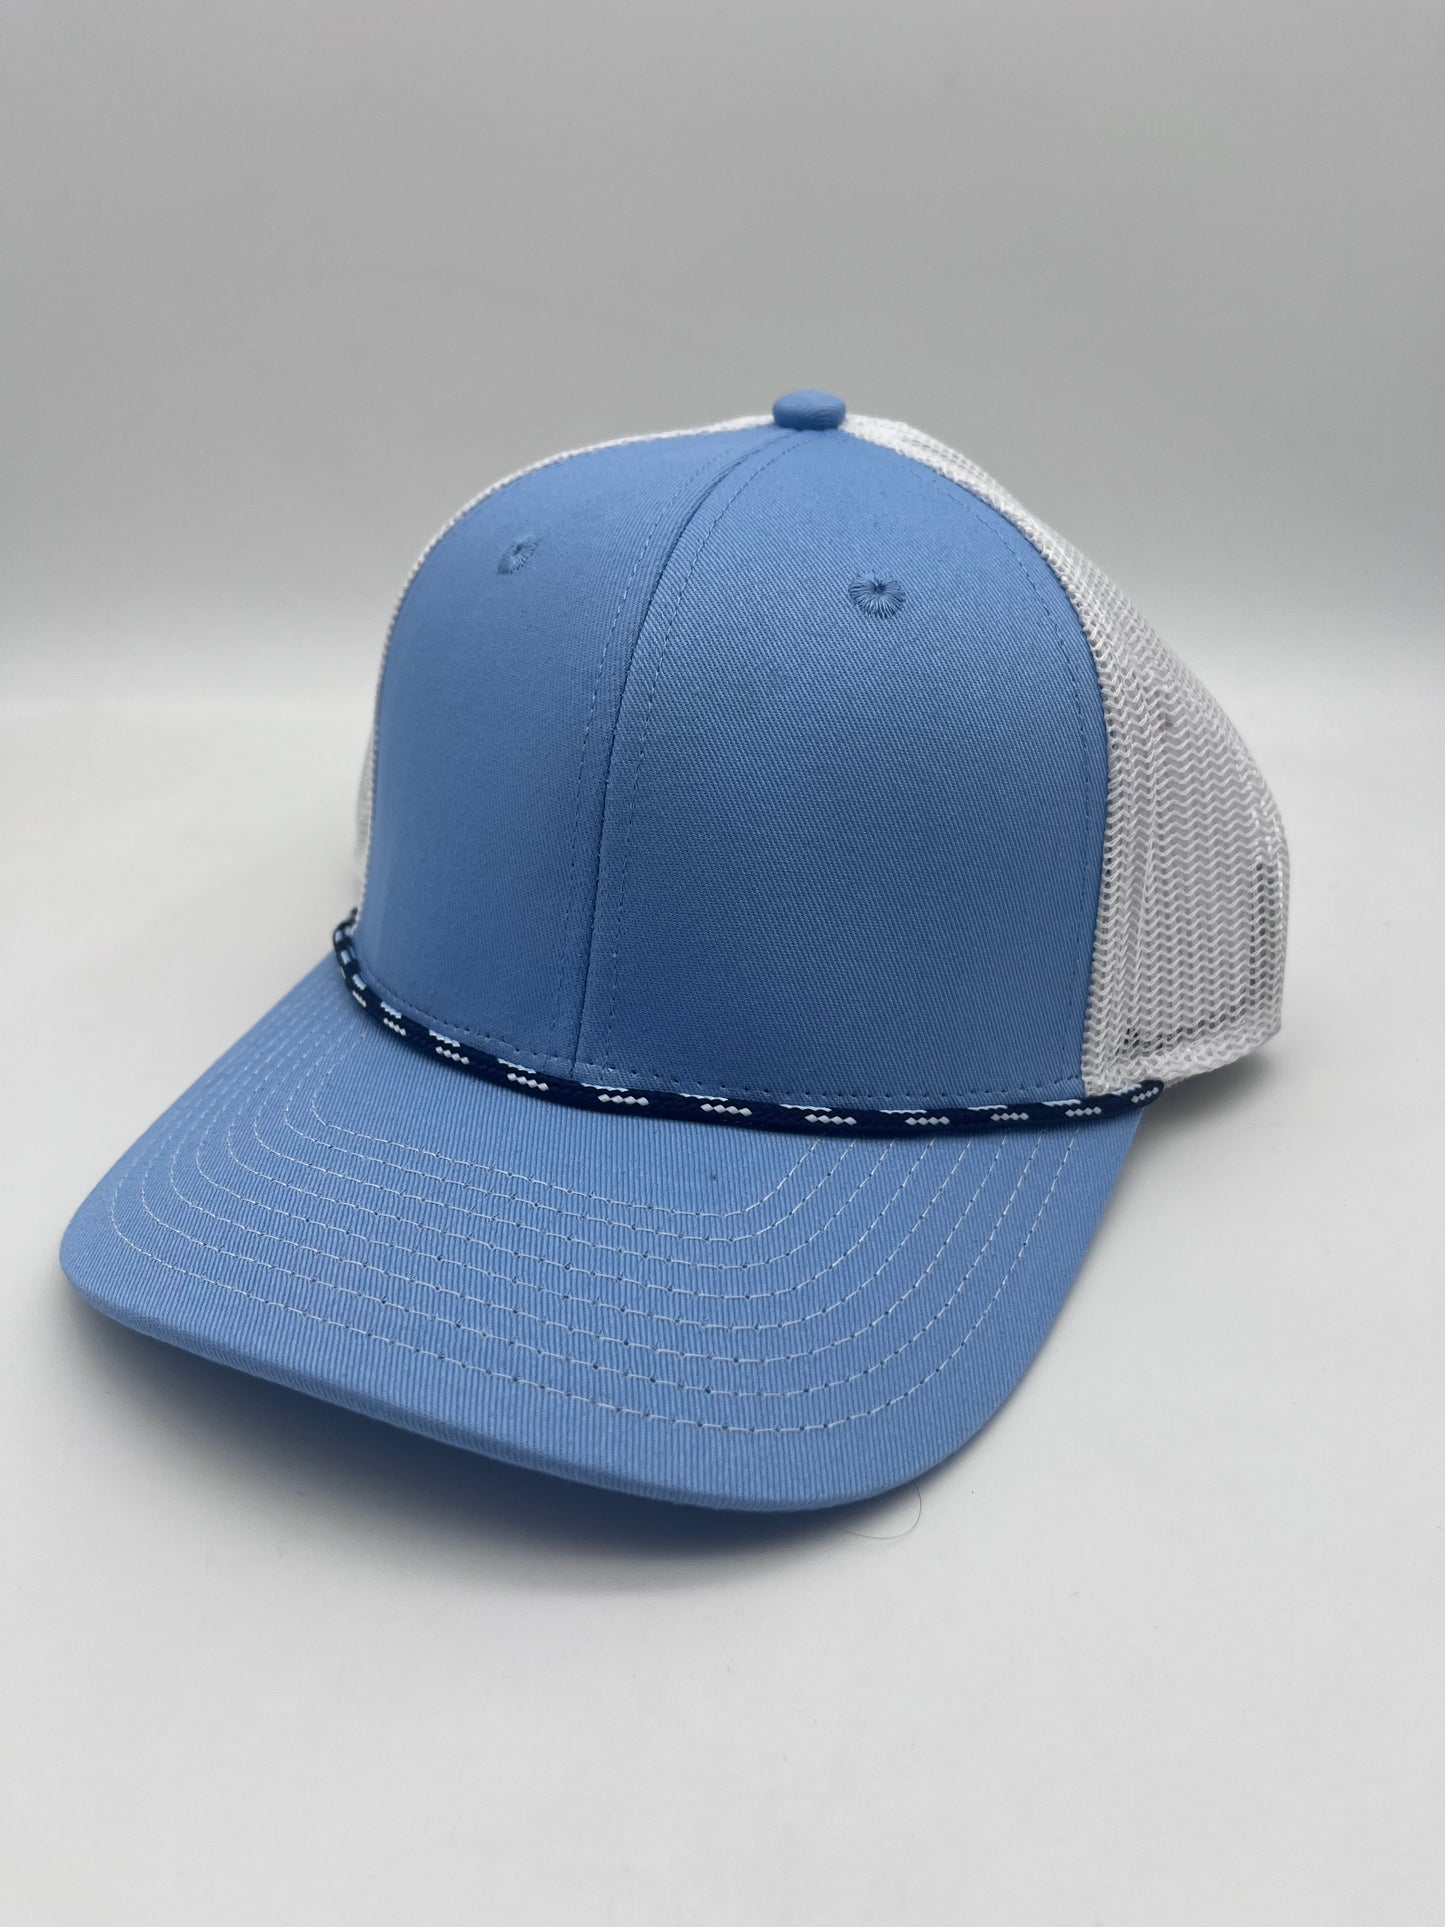 Light Blue / White with Black Rope - The Game